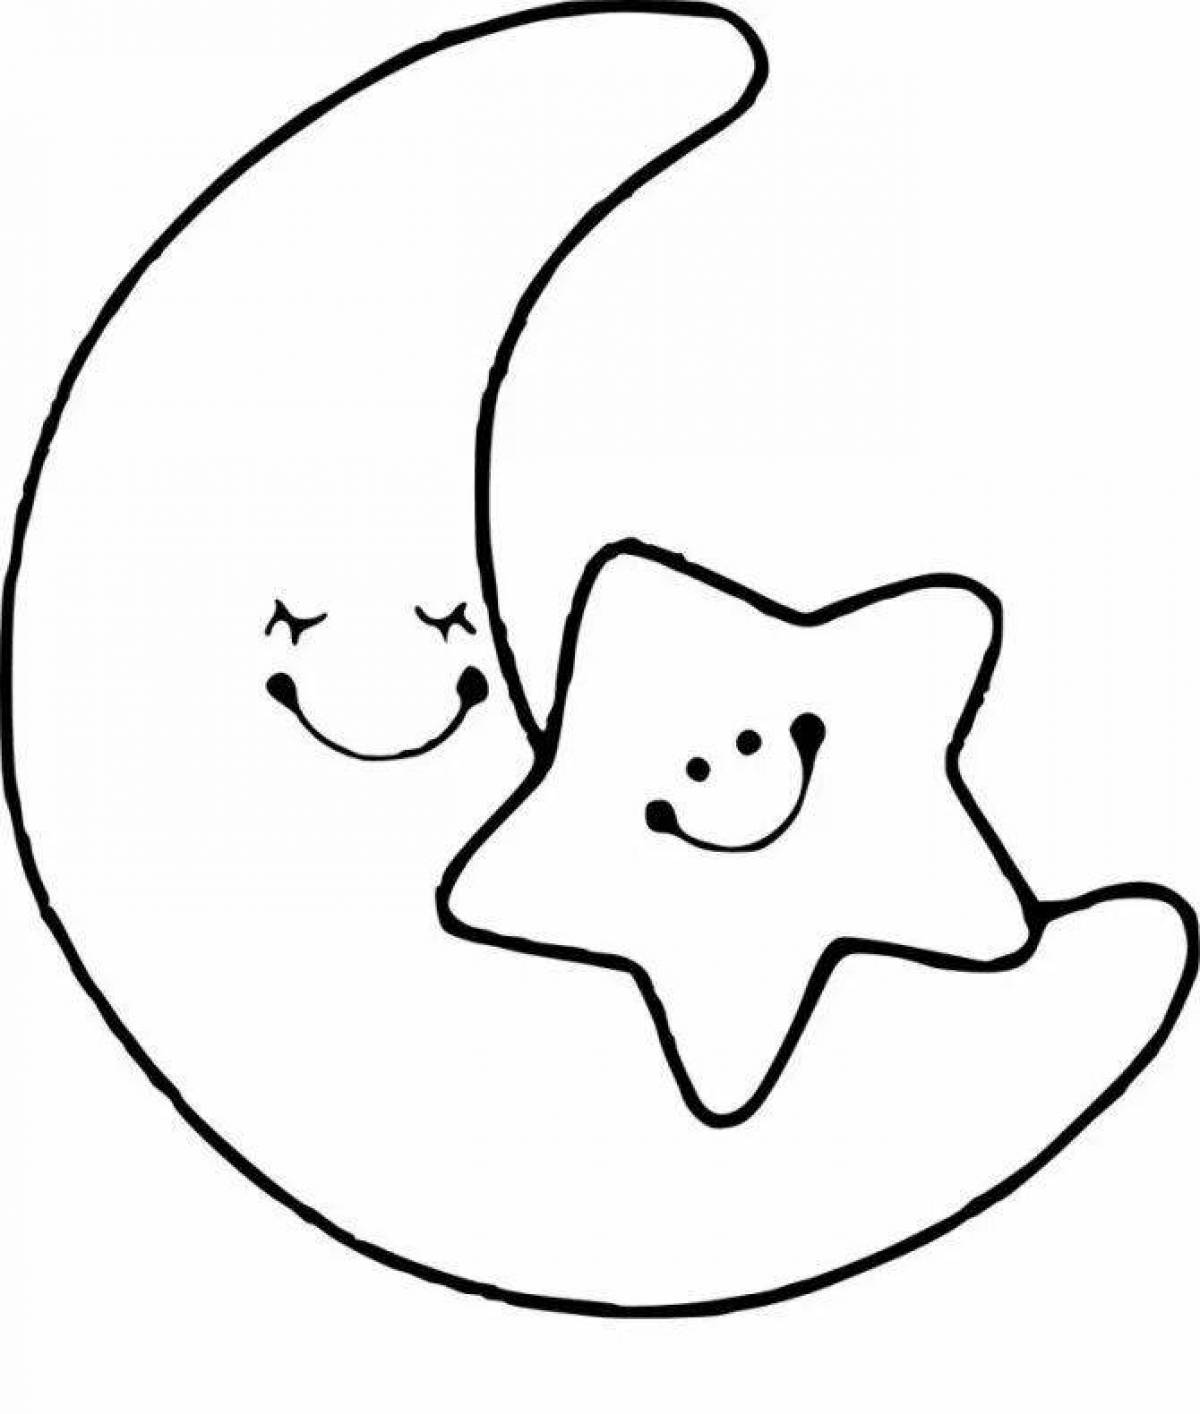 Delightful moon coloring for kids